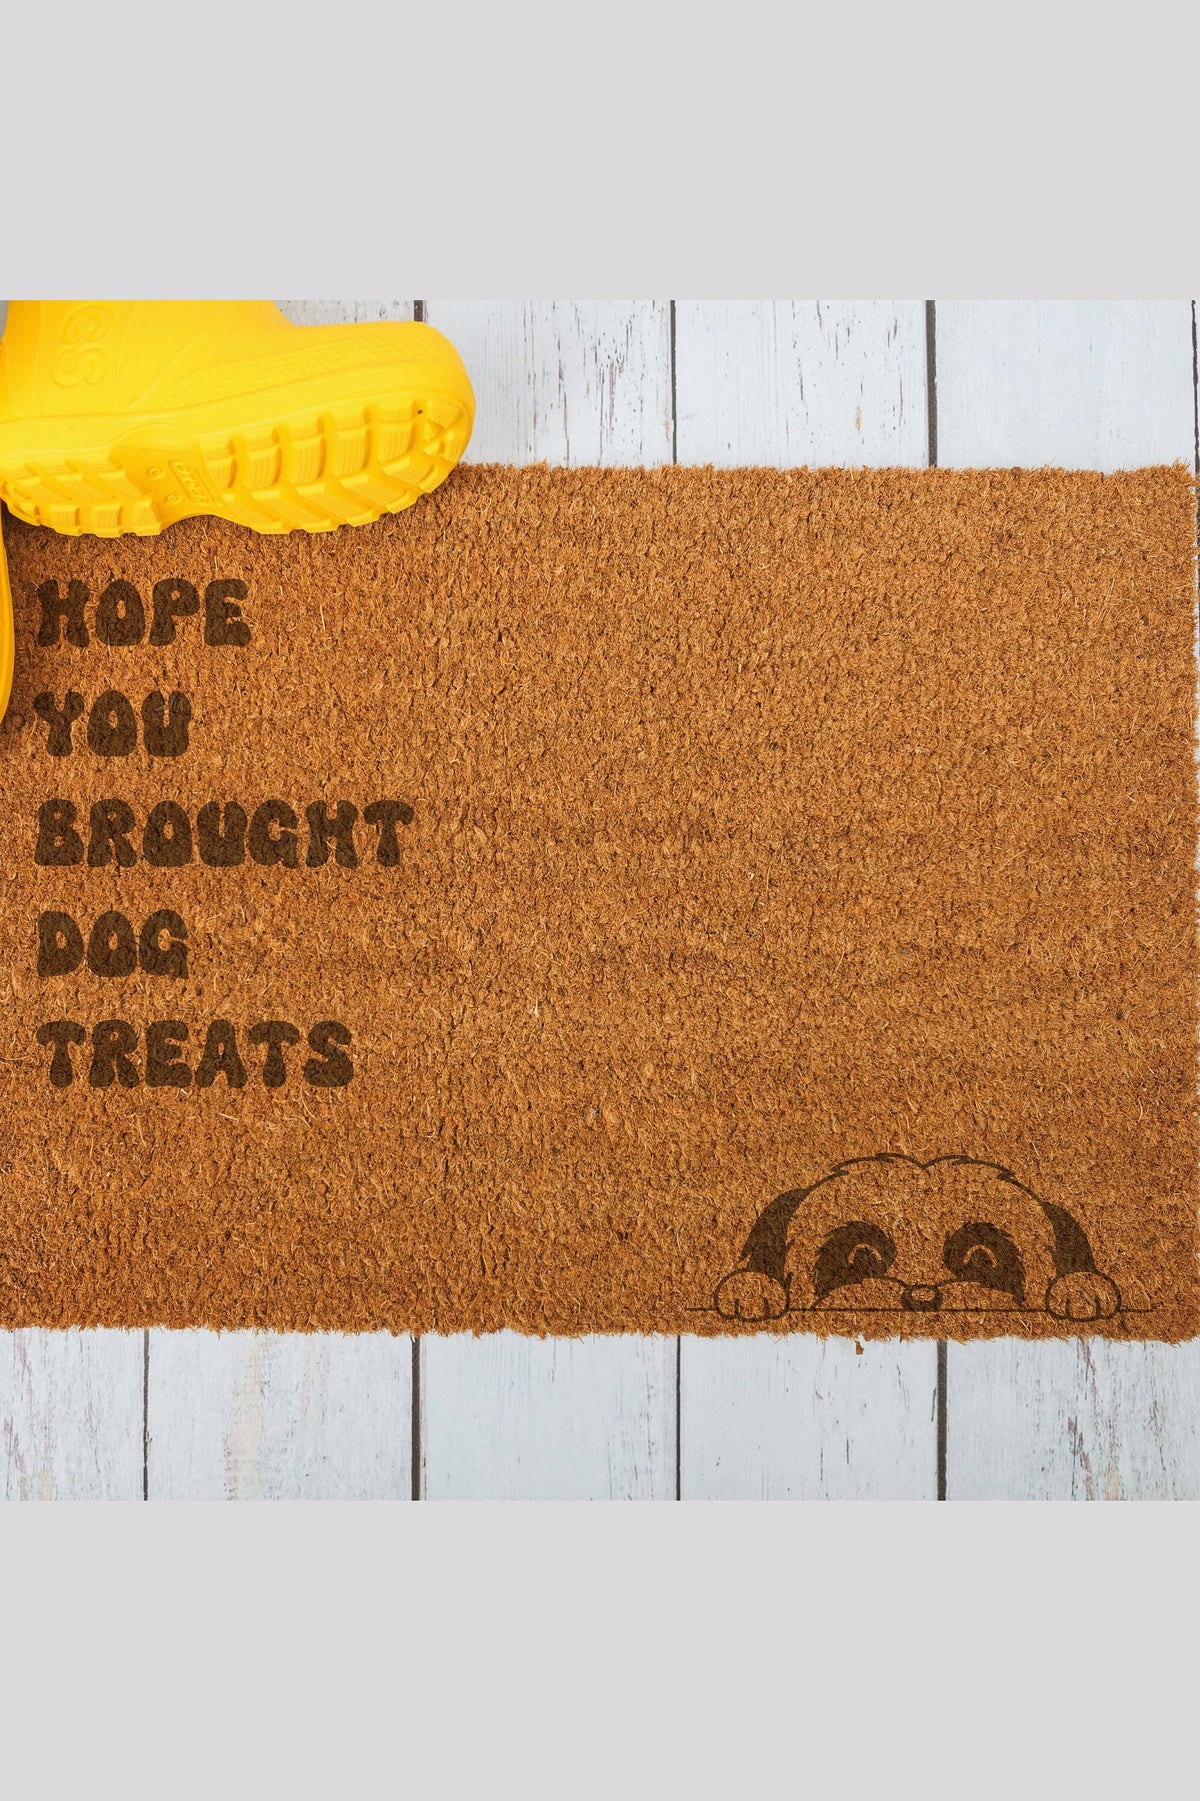 Outside Door Mat Custom Saying Gift for Housewarming Custom Quote Gift for New Home Dog Mama Gift Funny Door Mat Outdoor Funny Doormat Gift